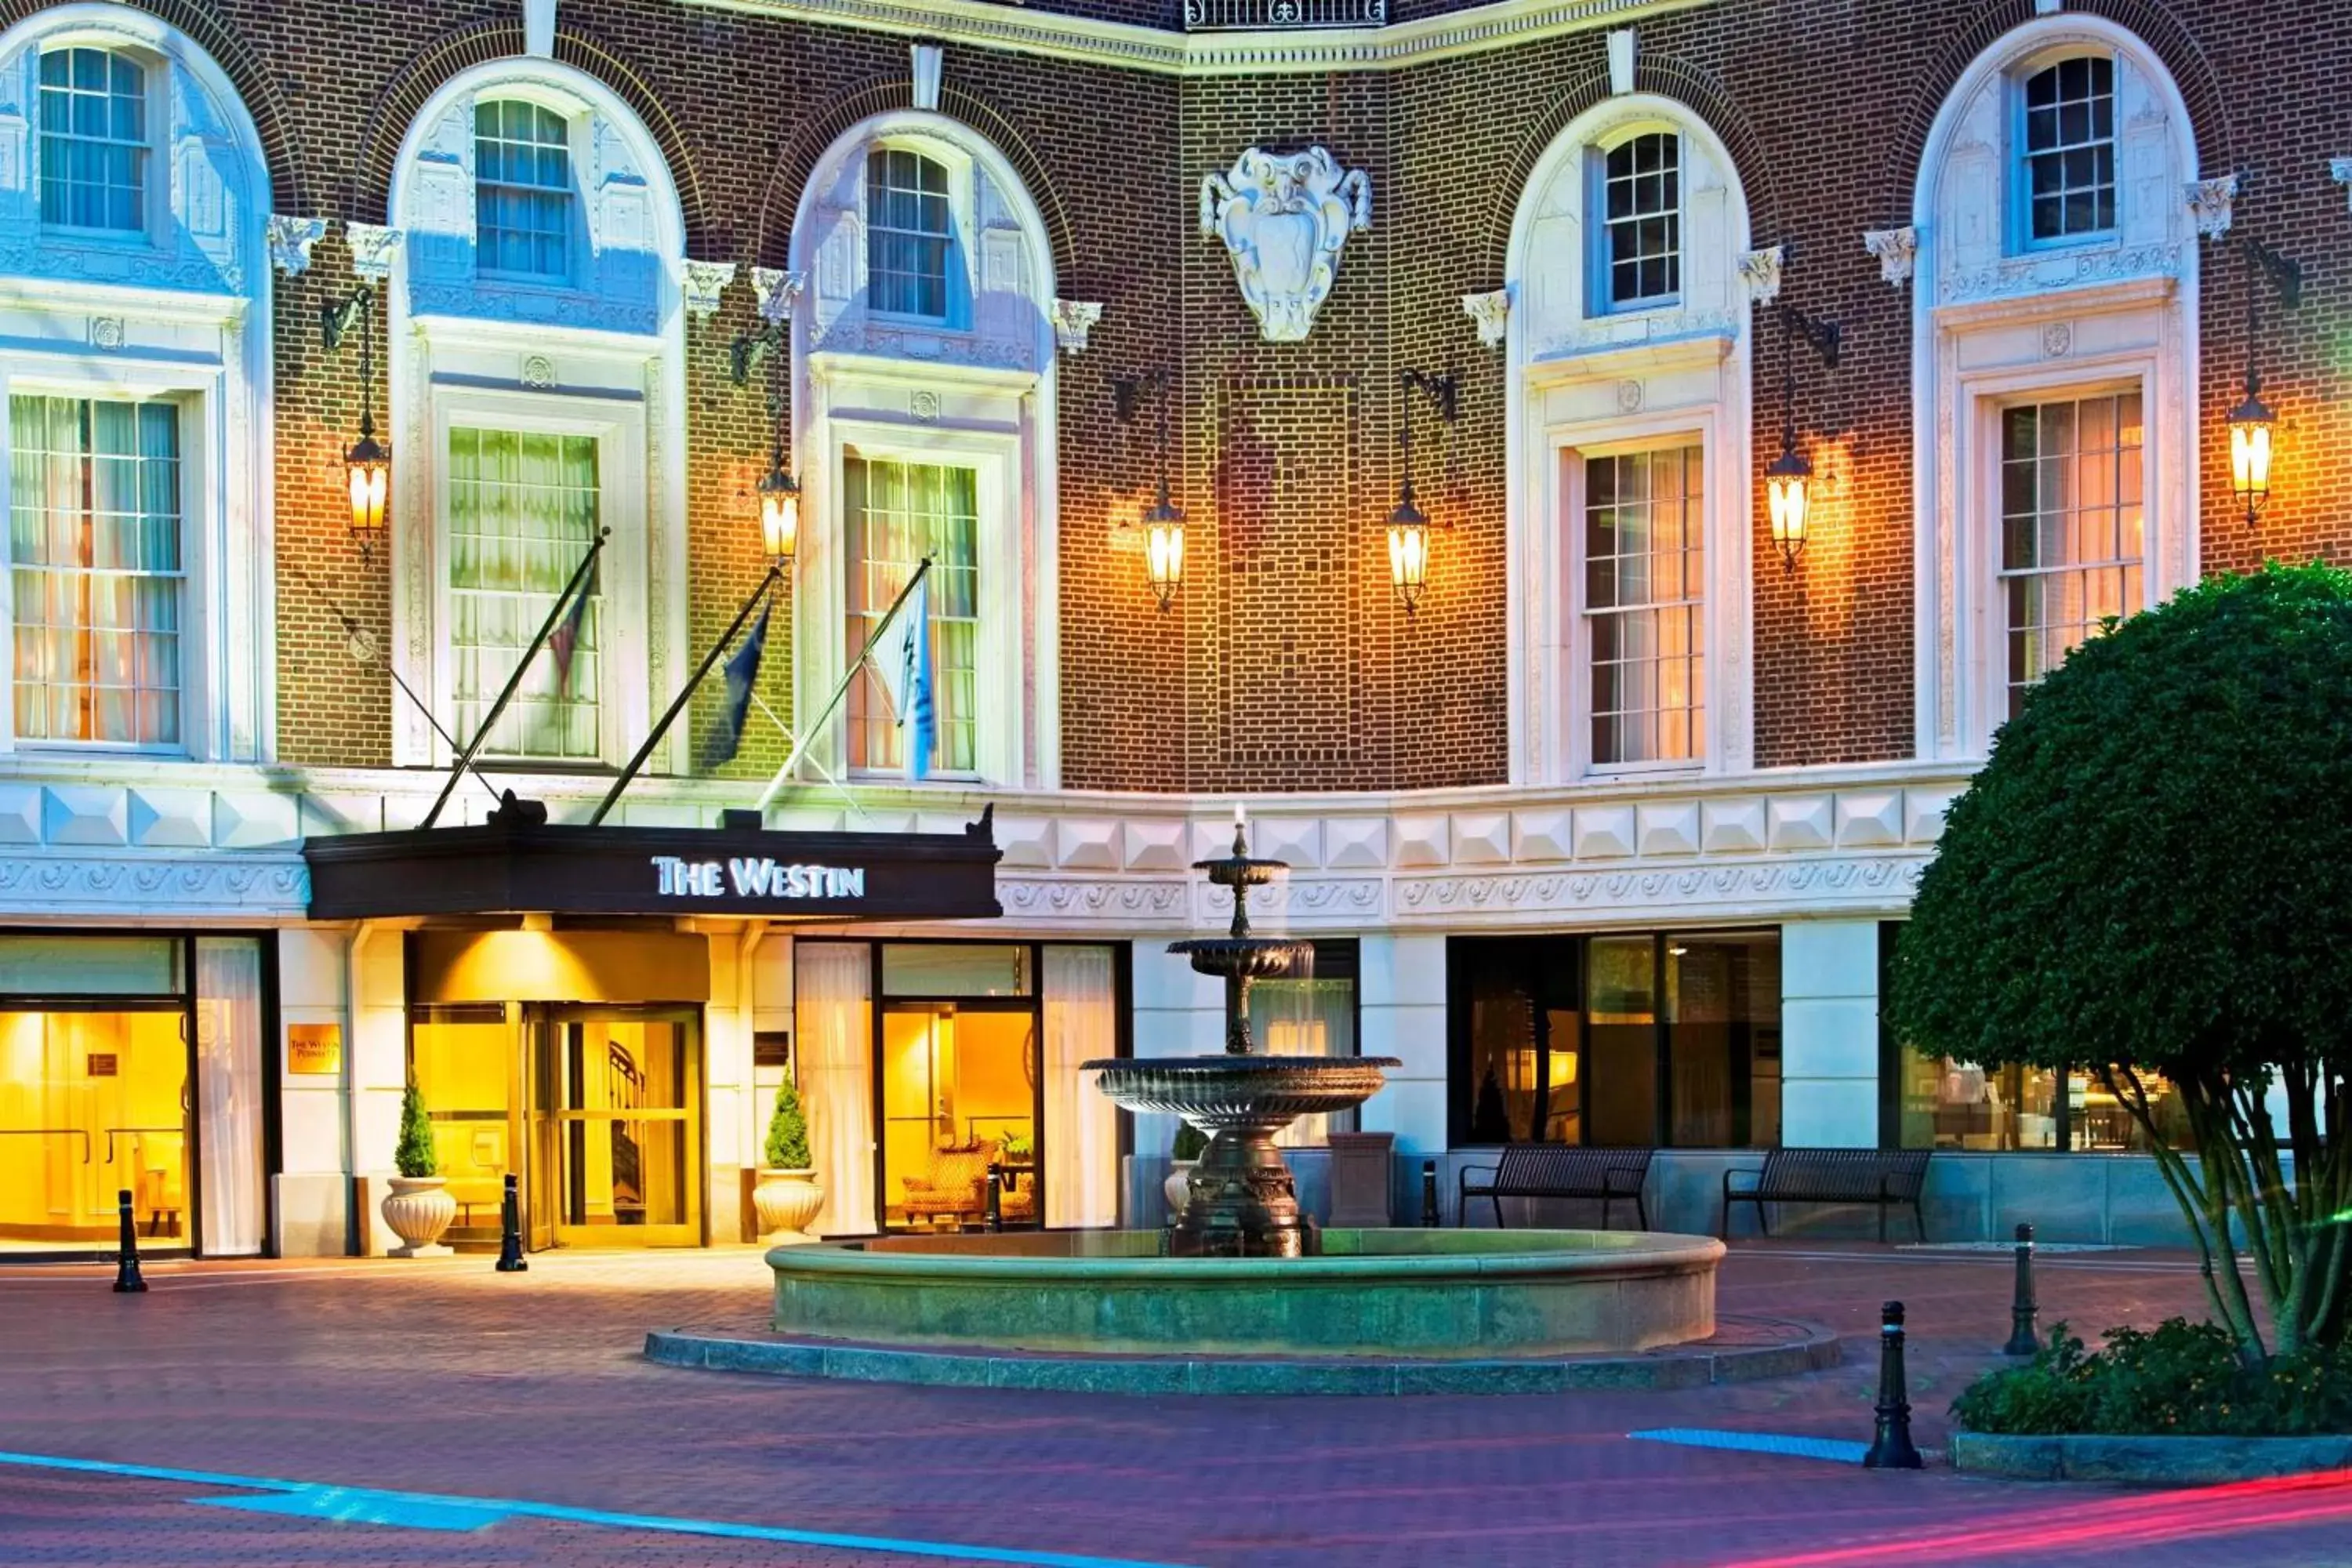 Property Building in The Westin Poinsett, Greenville